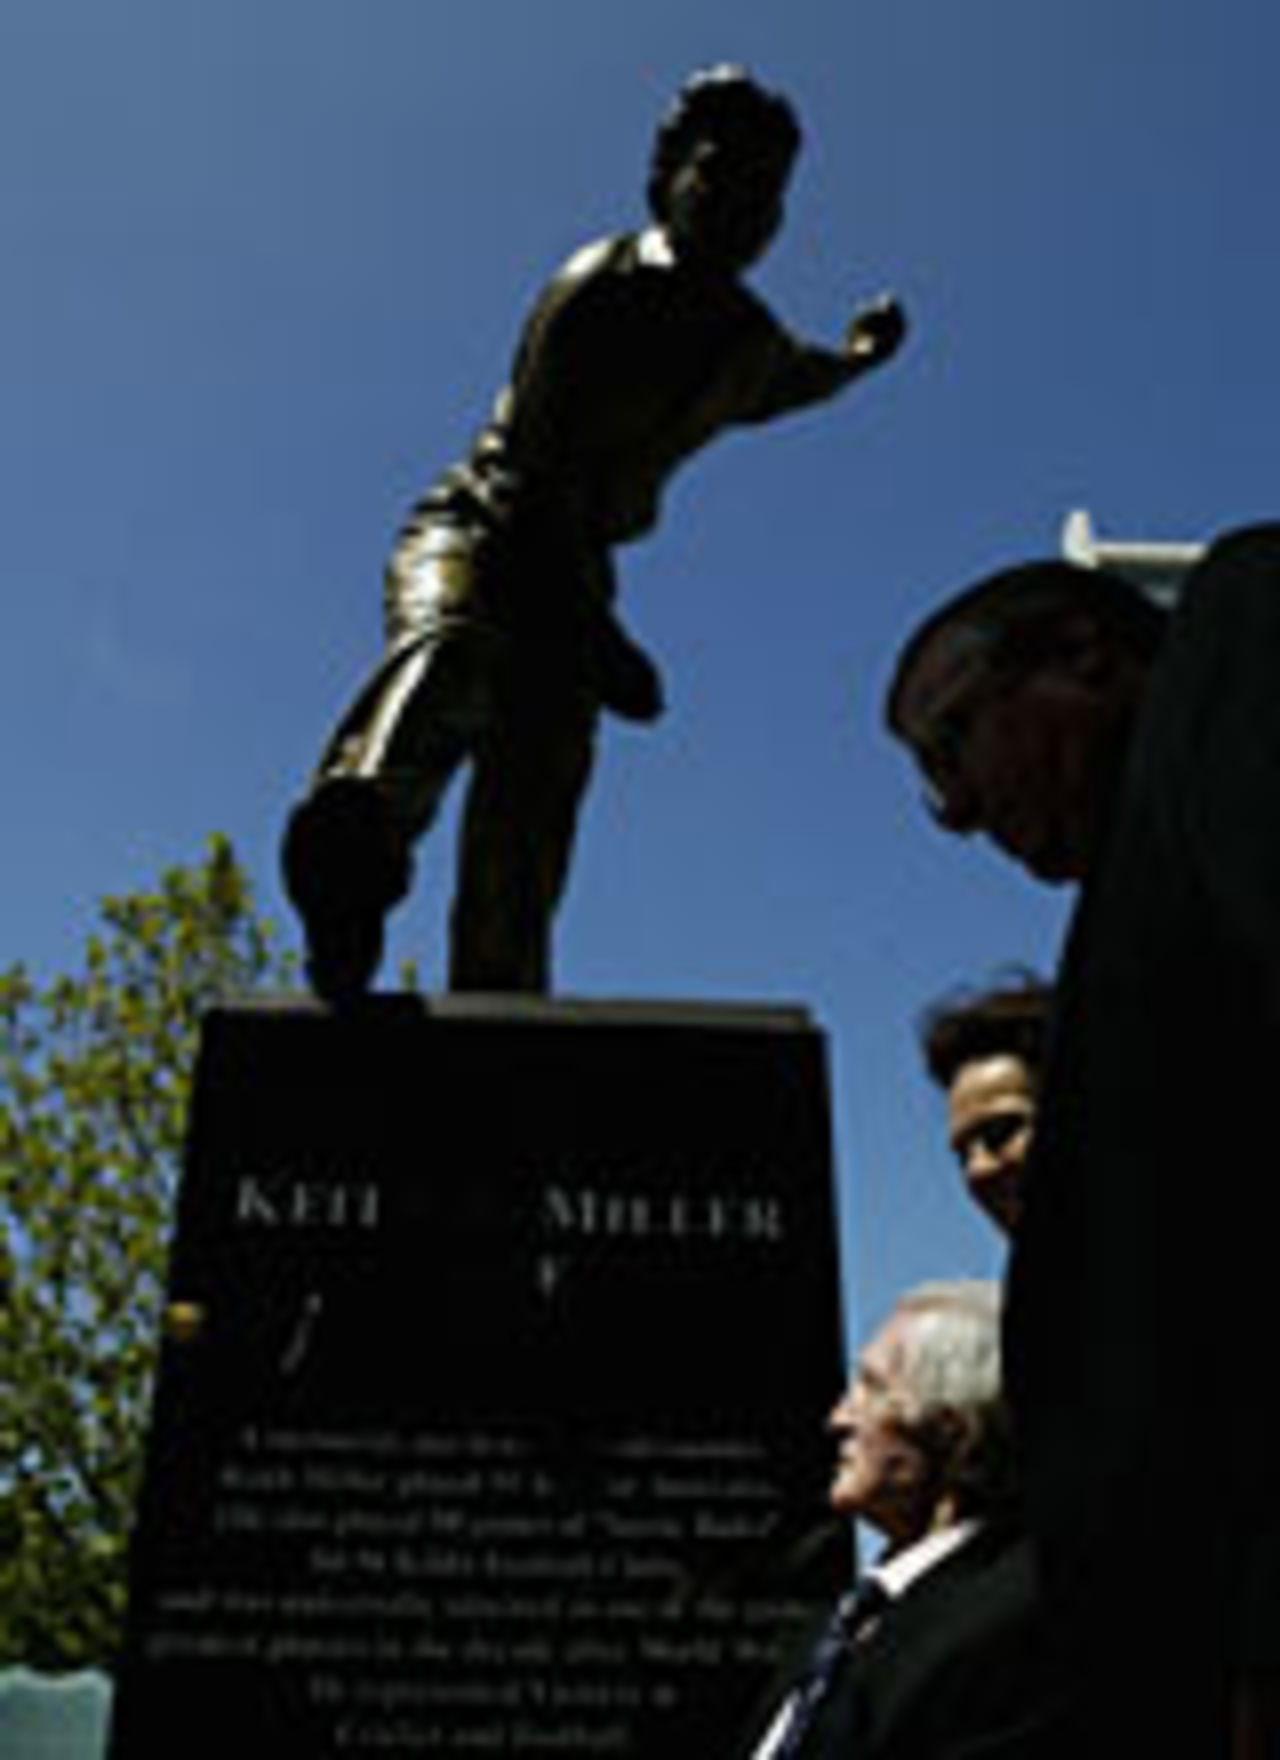 Keith Miller admires his statue during a ceremony at the MCG on February 16, 2004